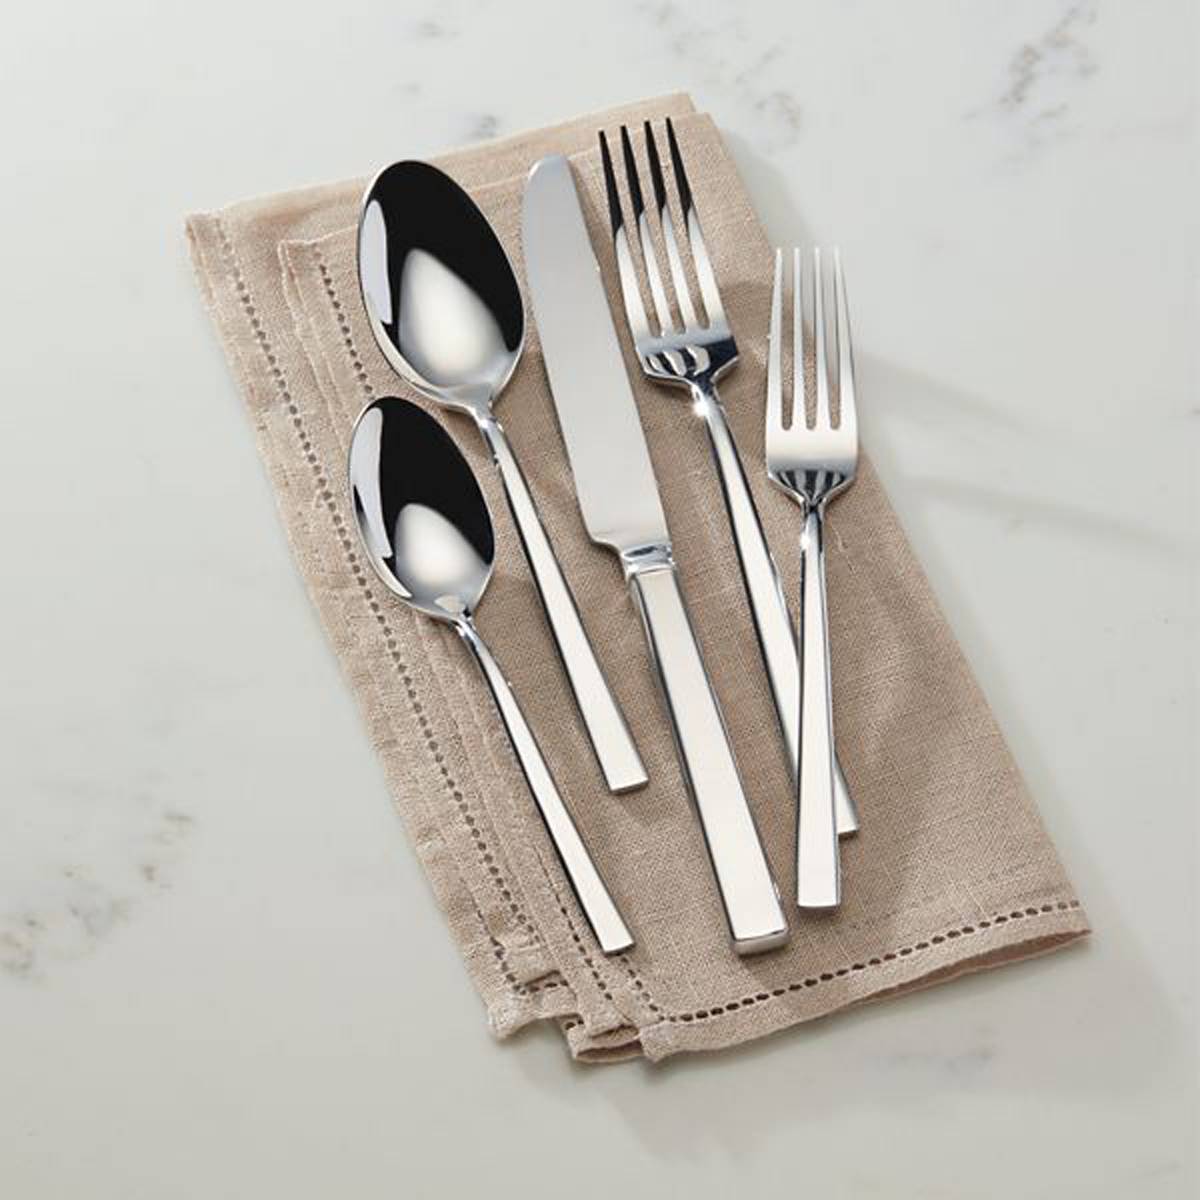 Reed & Barton(R) Cole(tm) 65pc. Flatware Set With Tapered Handles